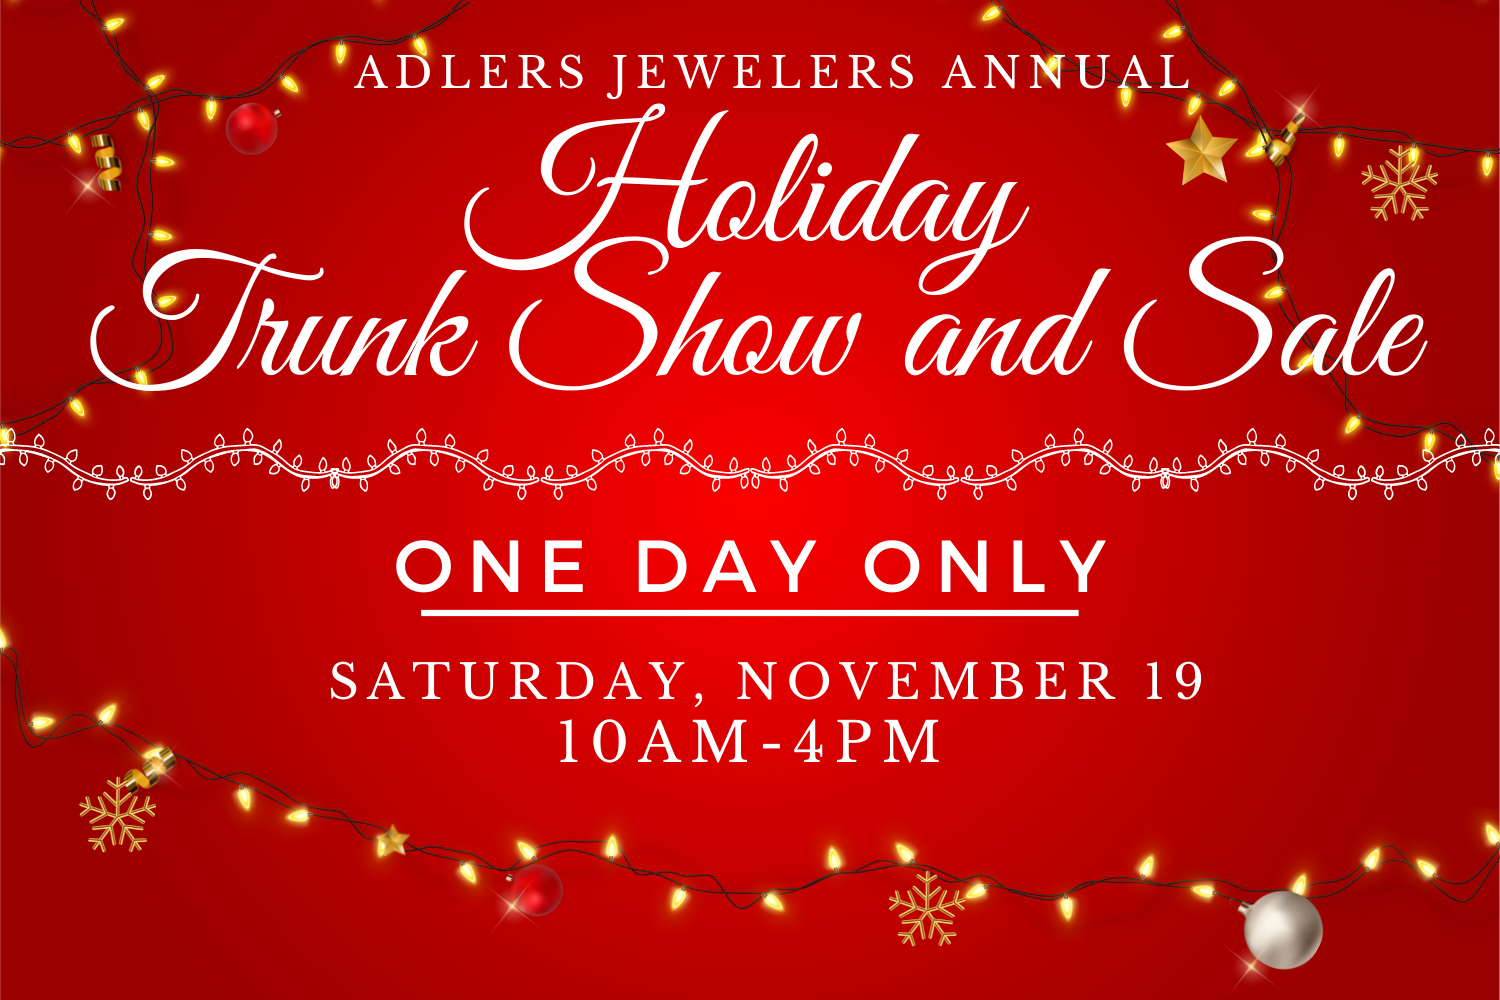 Holiday Trunk Sale - One Day Only - Nov. 19 10am-4pm